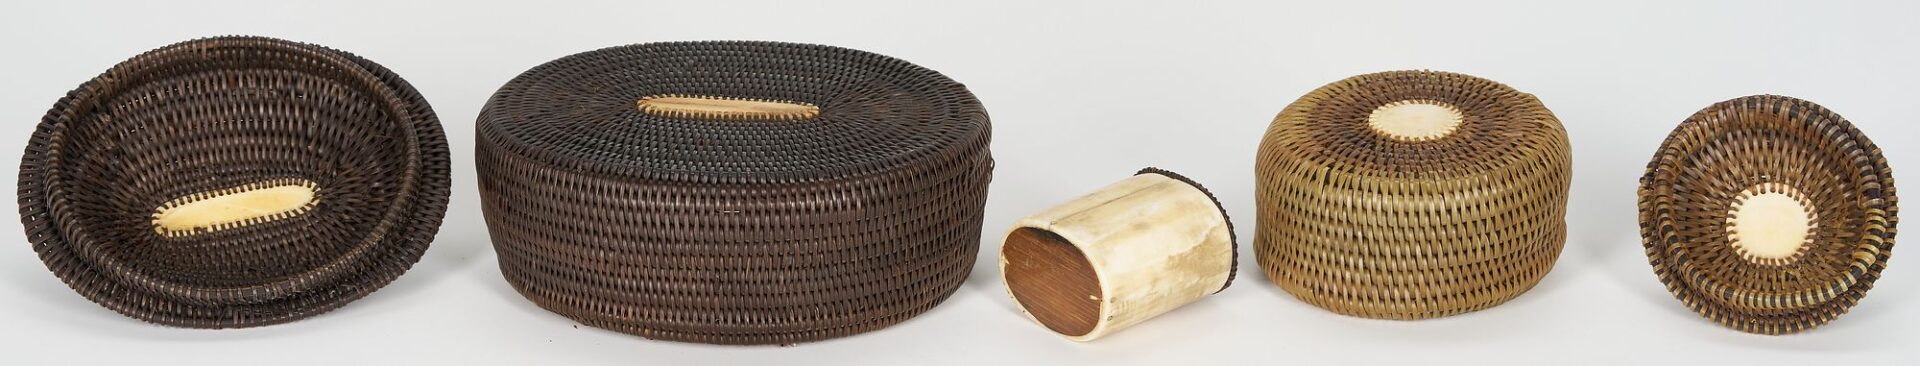 Lot 476: 3 Native American Inuit Baleen Items, Baskets and Box